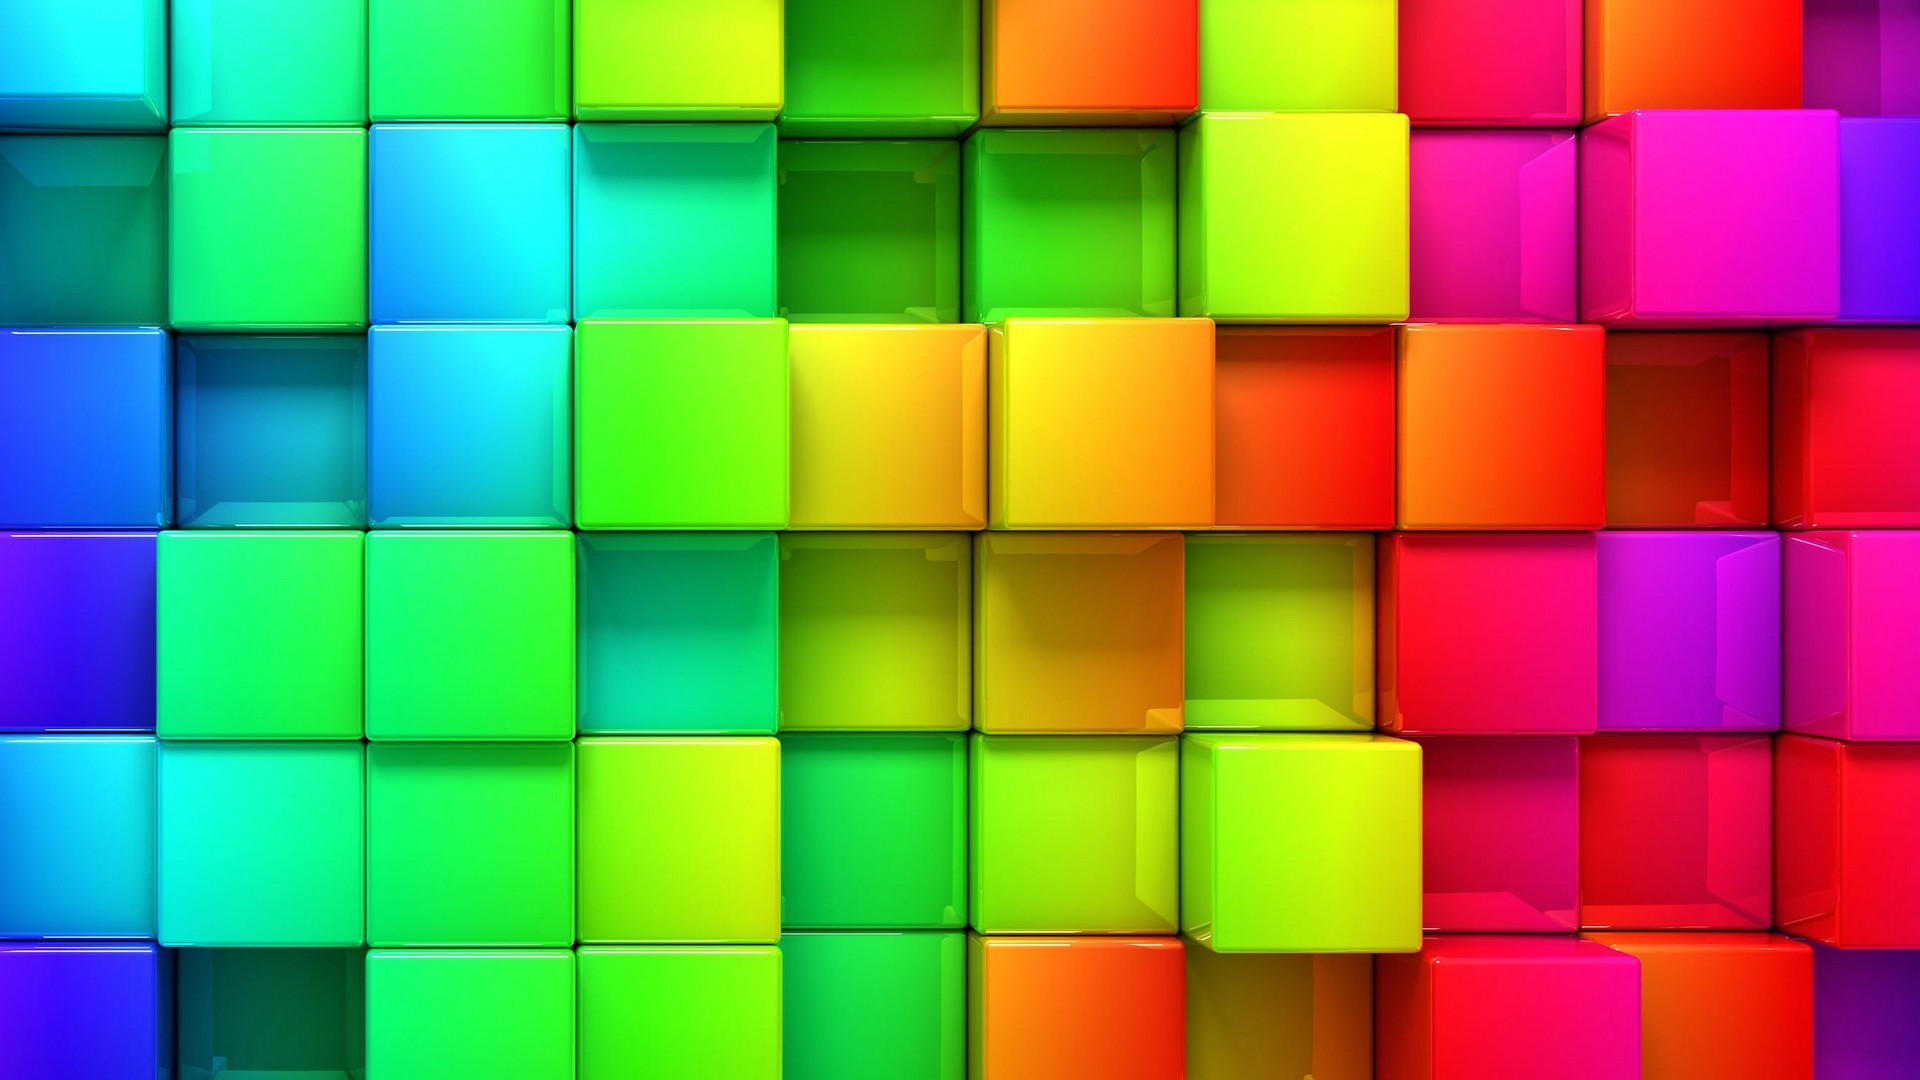 Wallpaper Rainbow Colors HD with image resolution 1920x1080 pixel. You can make this wallpaper for your Desktop Computer Backgrounds, Mac Wallpapers, Android Lock screen or iPhone Screensavers